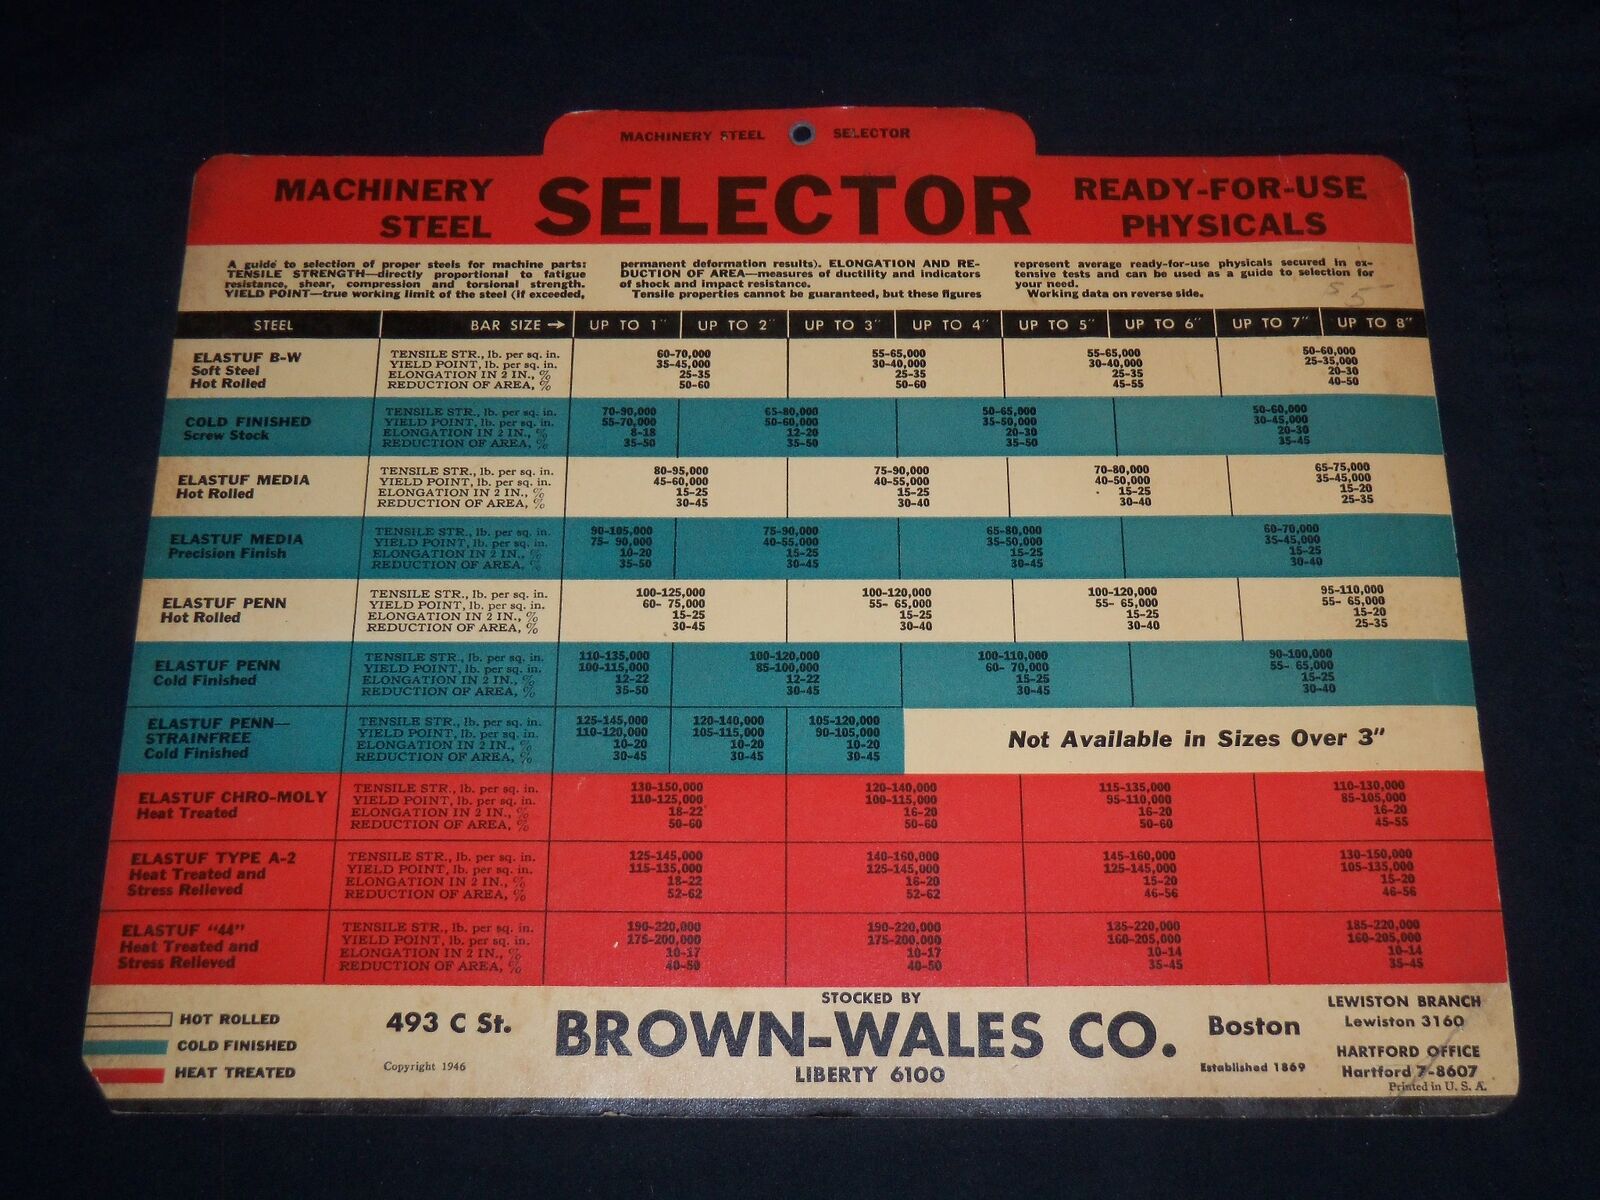 1946 BROWN-WALES COMPANY MACHINERY STEEL SELECTOR READY FOR USE PHYSICAL- J 9034